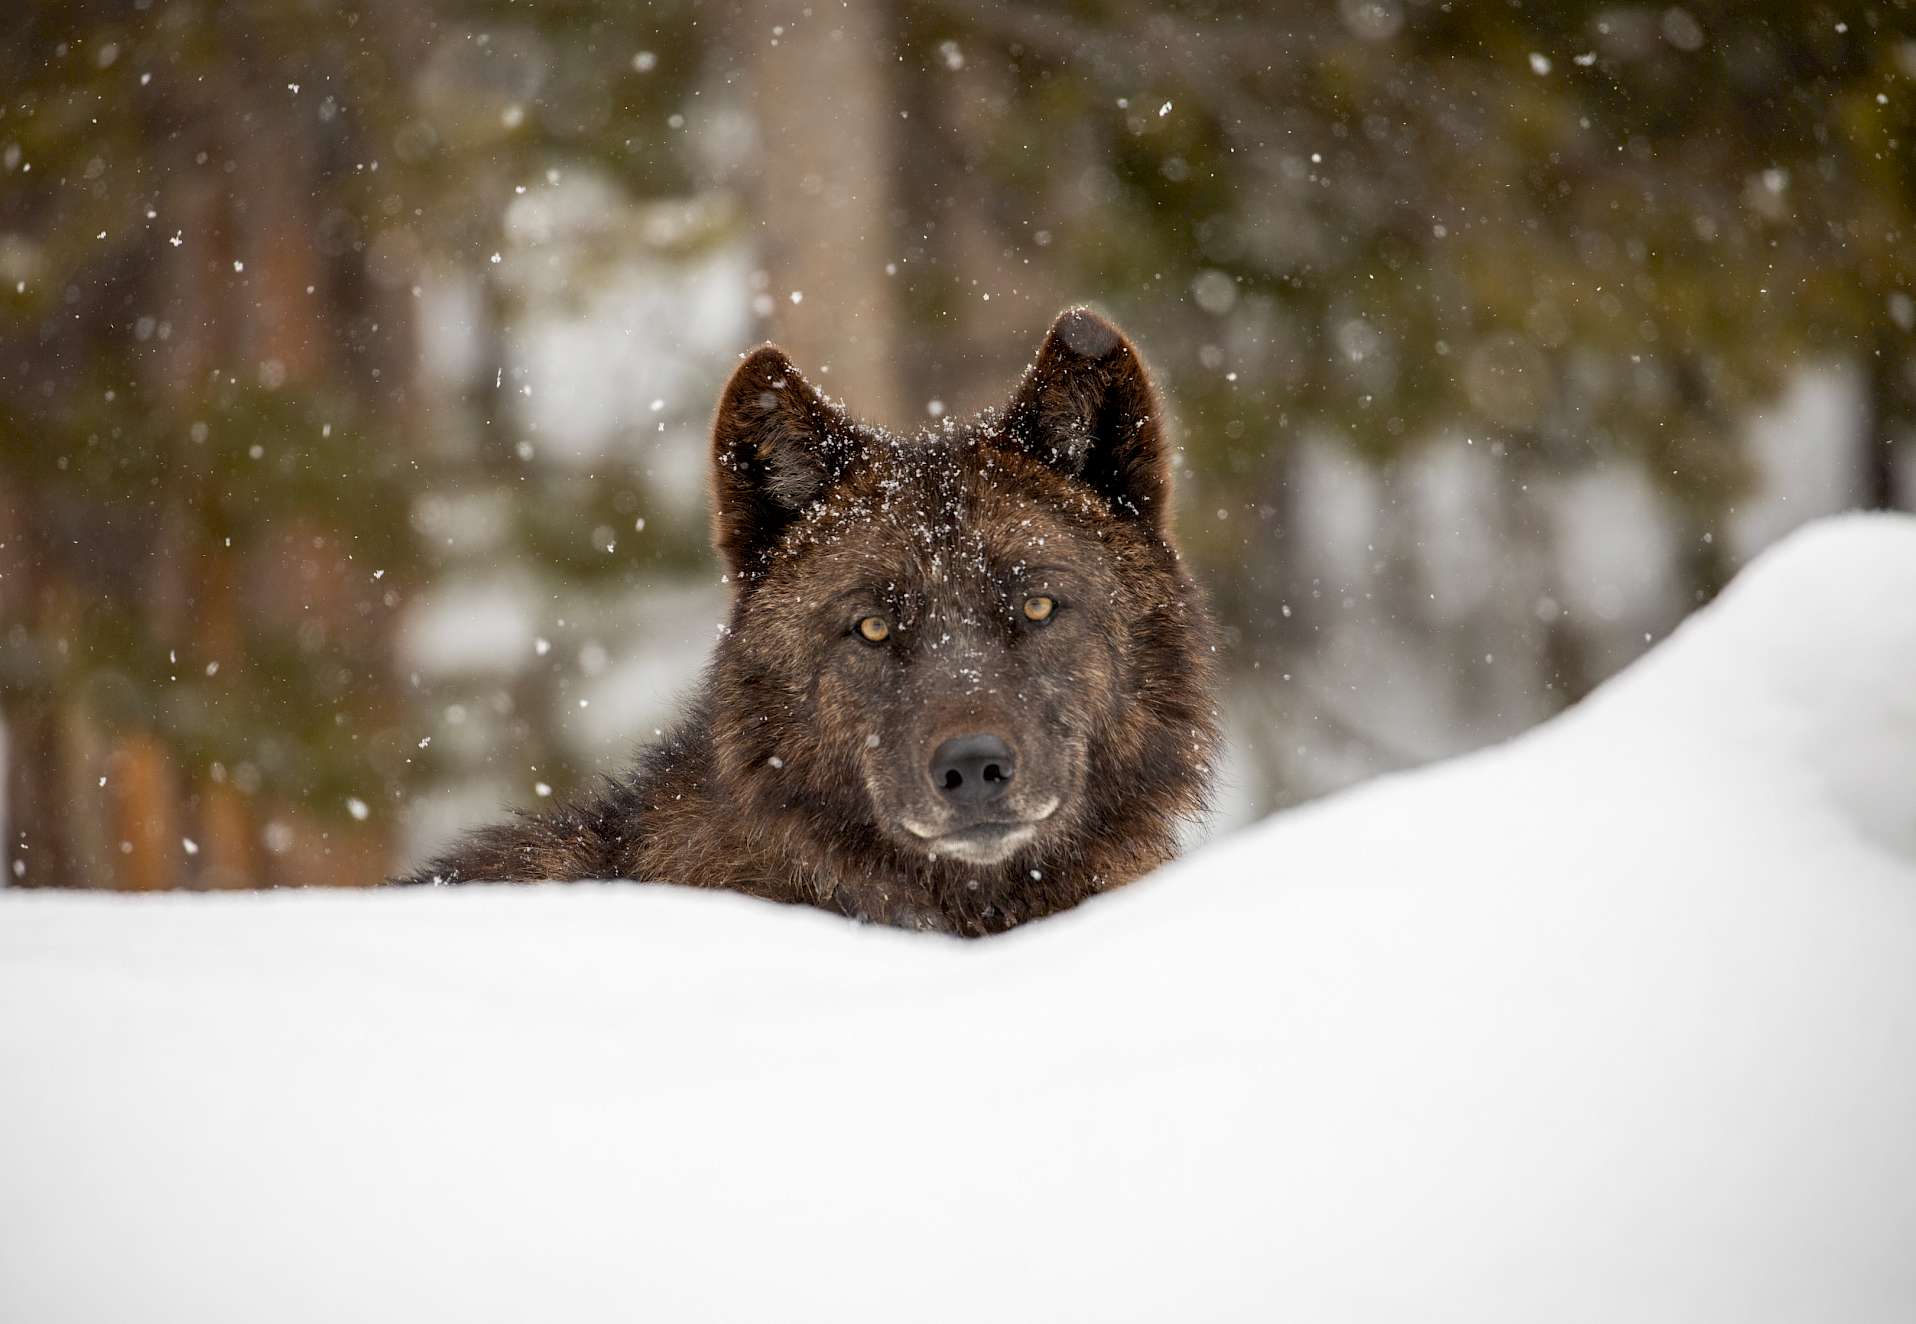 Wolves have been back in Yellowstone for some time now and their populations are expanding.